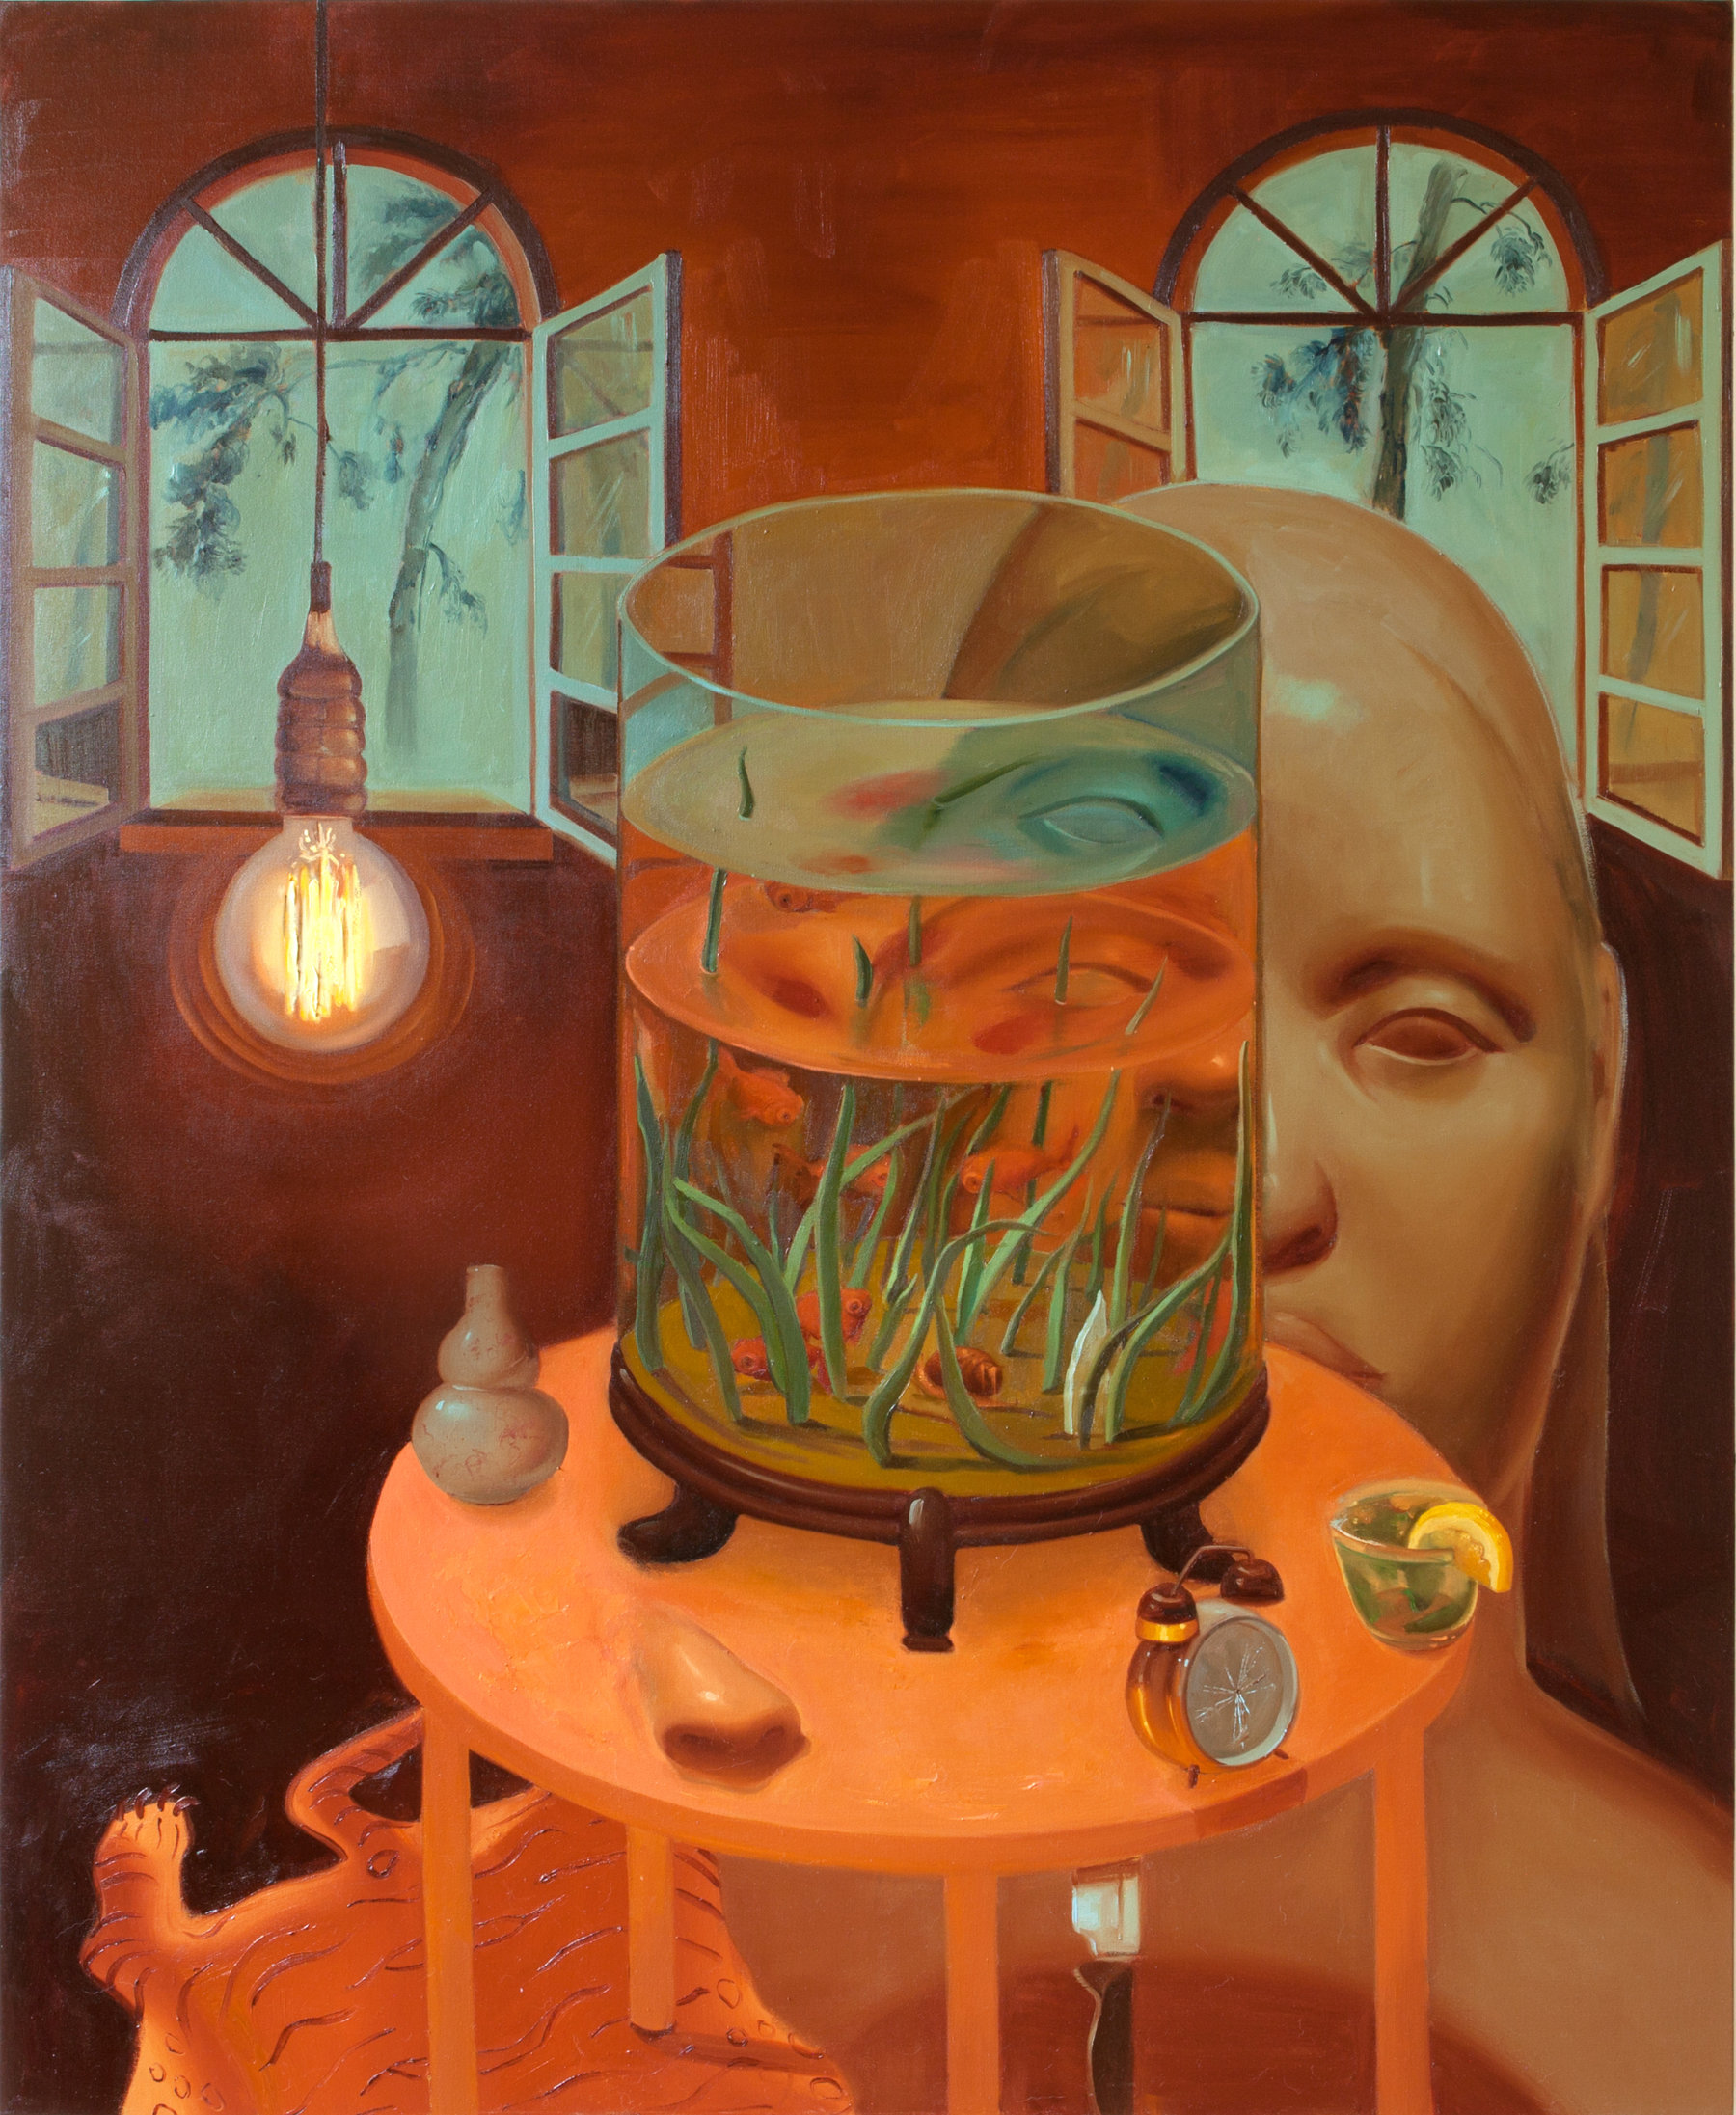 Art piece of woman looking into glass bowl of fish called "Stay Home" by Dominique Fung